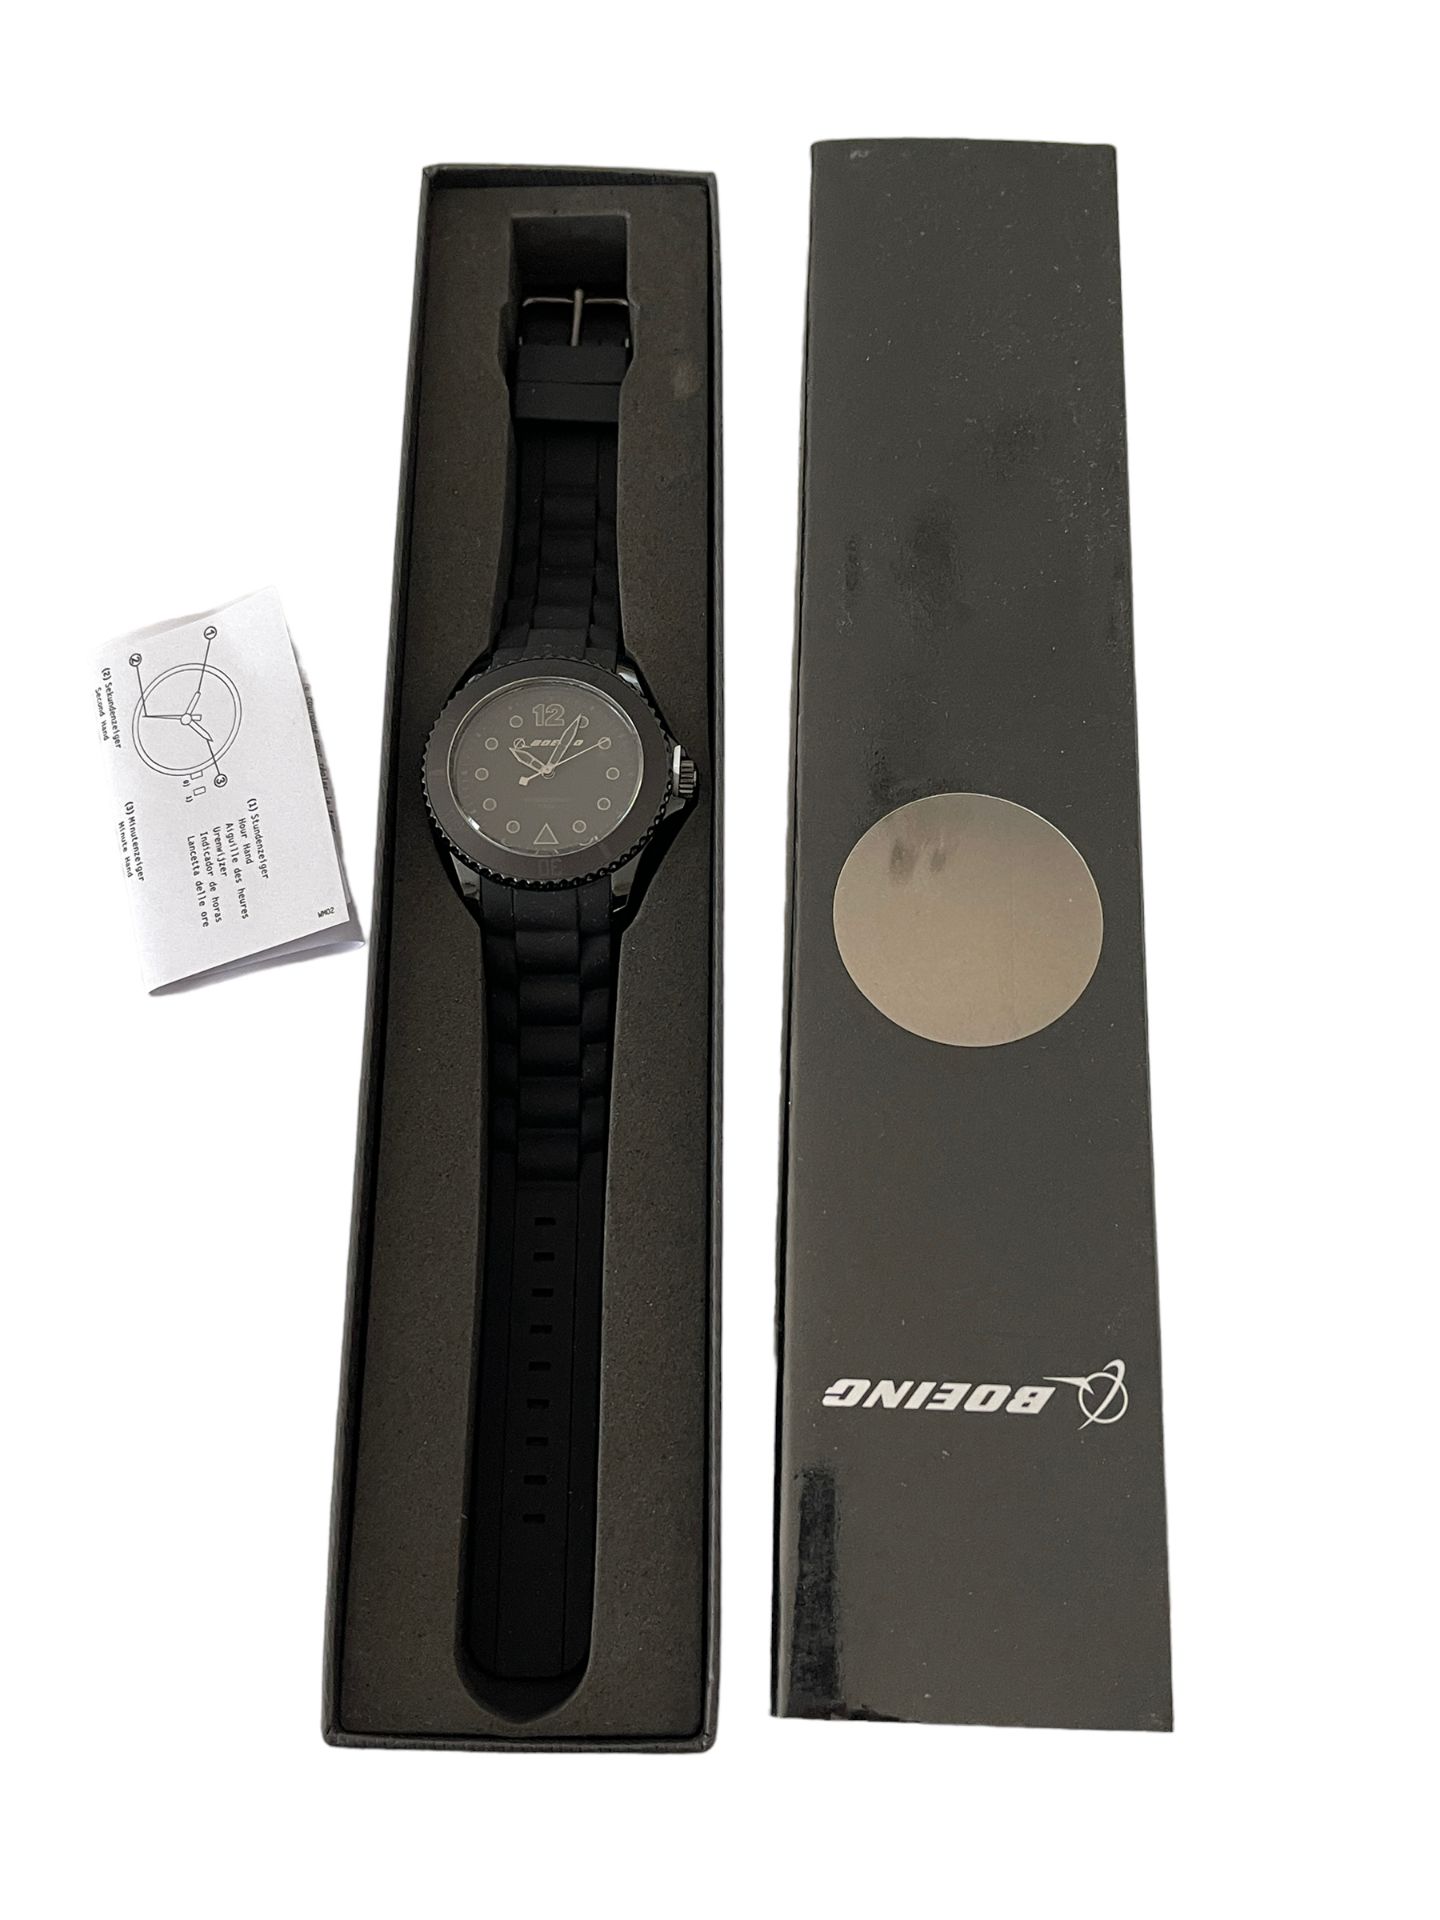 BOEING STAFF ISSUE UNISEX WATCH NEW NEVER BEEN USED